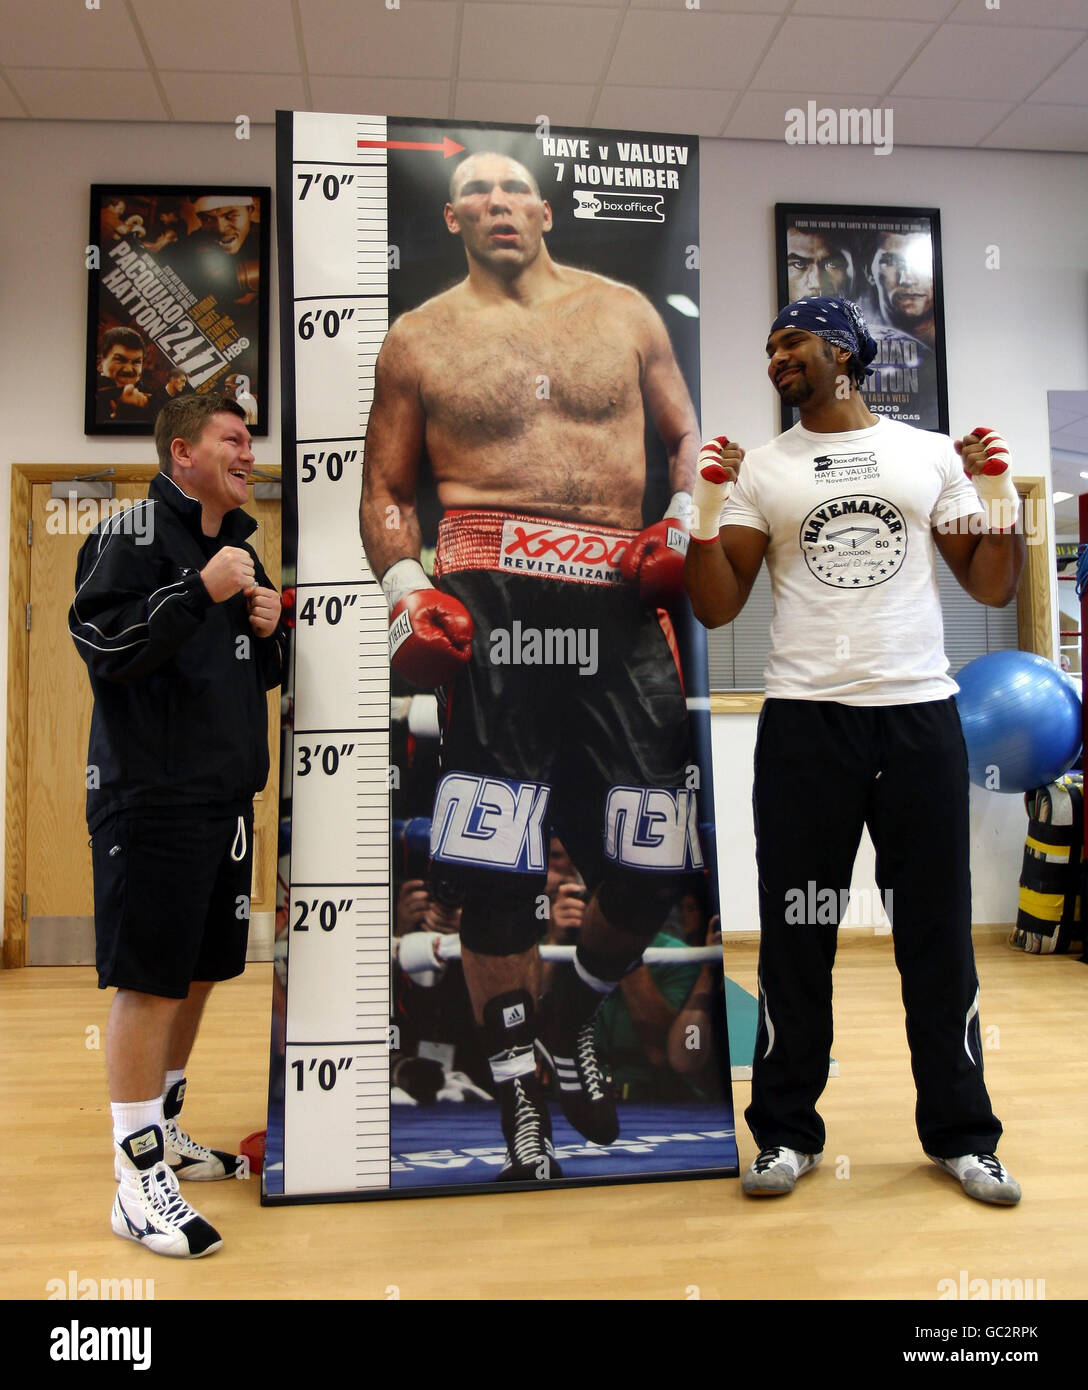 ¿Cuánto mide David Haye? - Altura - Real height Boxing-ricky-hatton-photocall-hatton-health-and-fitness-gym-hyde-GC2RPK